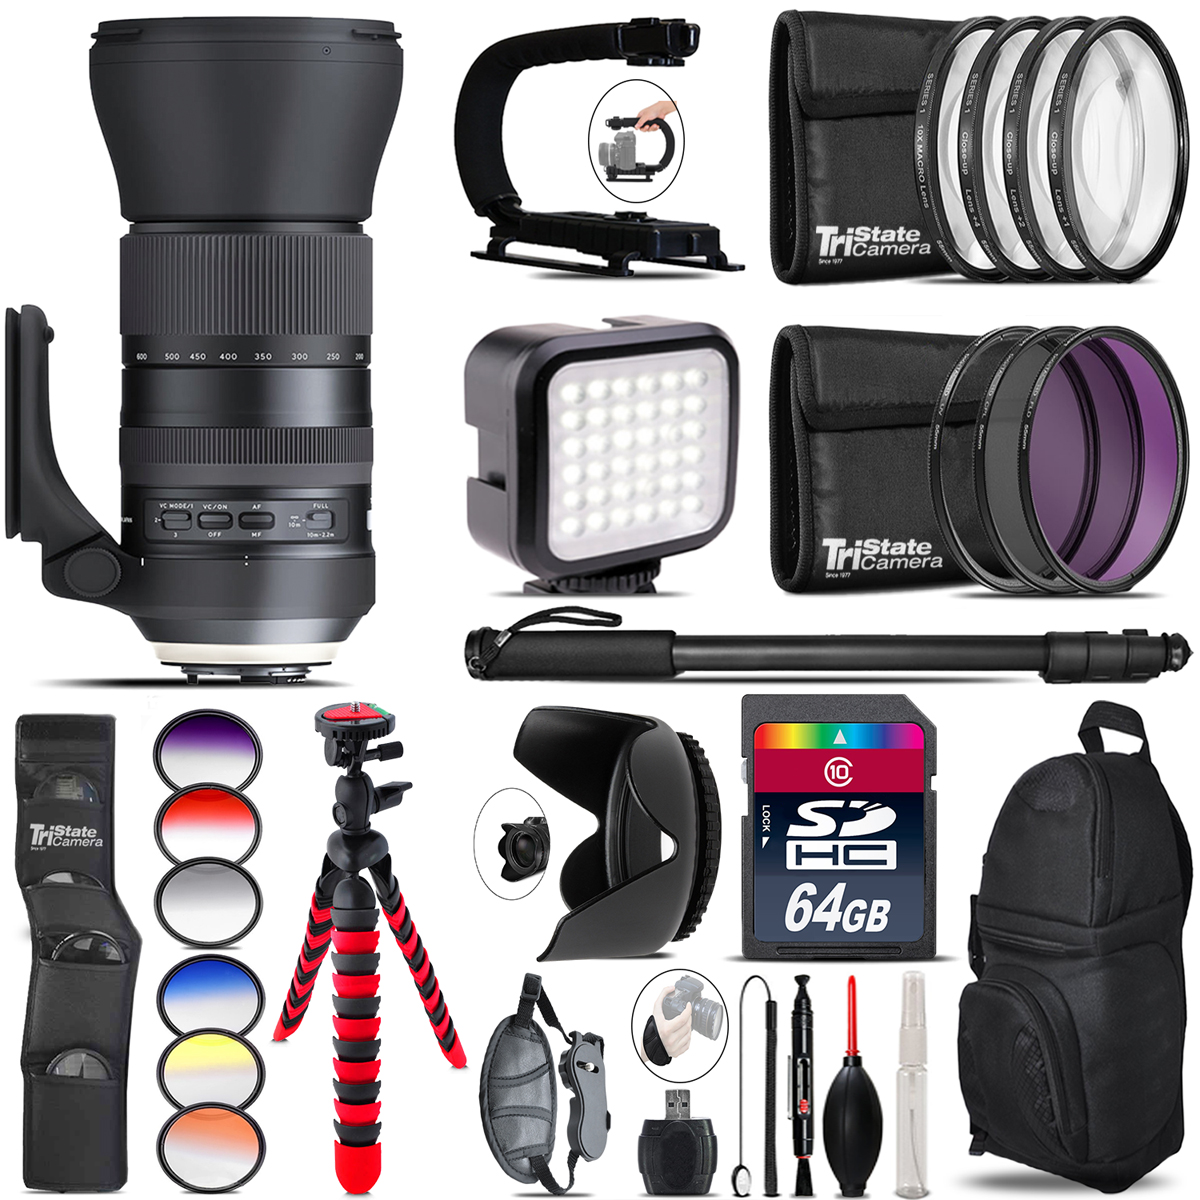 Tamron 150-600mm G2 for Canon - Video Kit + Color Filter - 64GB Accessory Kit *FREE SHIPPING*